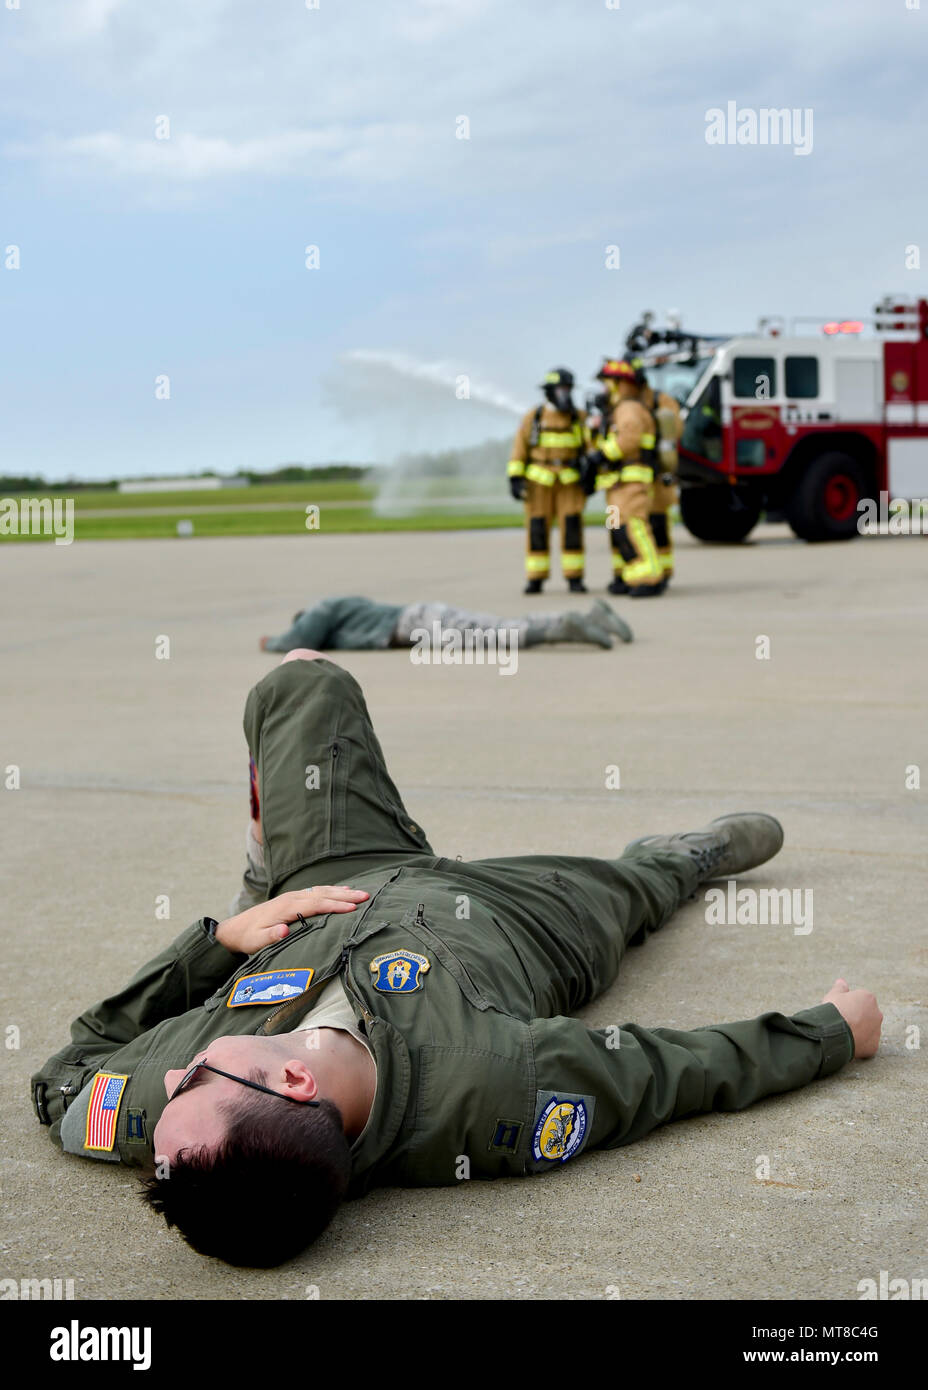 Capt. Matt McKay, a pilot trainee with the 757th Airlift Squadron here, portrays an accident victim during a Major Accident Response Exercise (MARE), May 16, 2017, while installation firefighters arrive and coordinate their initial response. The purpose of the exercise, conducted by the Wing Inspection Team and Emergency Management office, was to document response capabilities of installation personnel while honing joint response practices with local agencies including local law enforcement and the American Red Cross. (U.S. Air Force photo/Eric White) Stock Photo